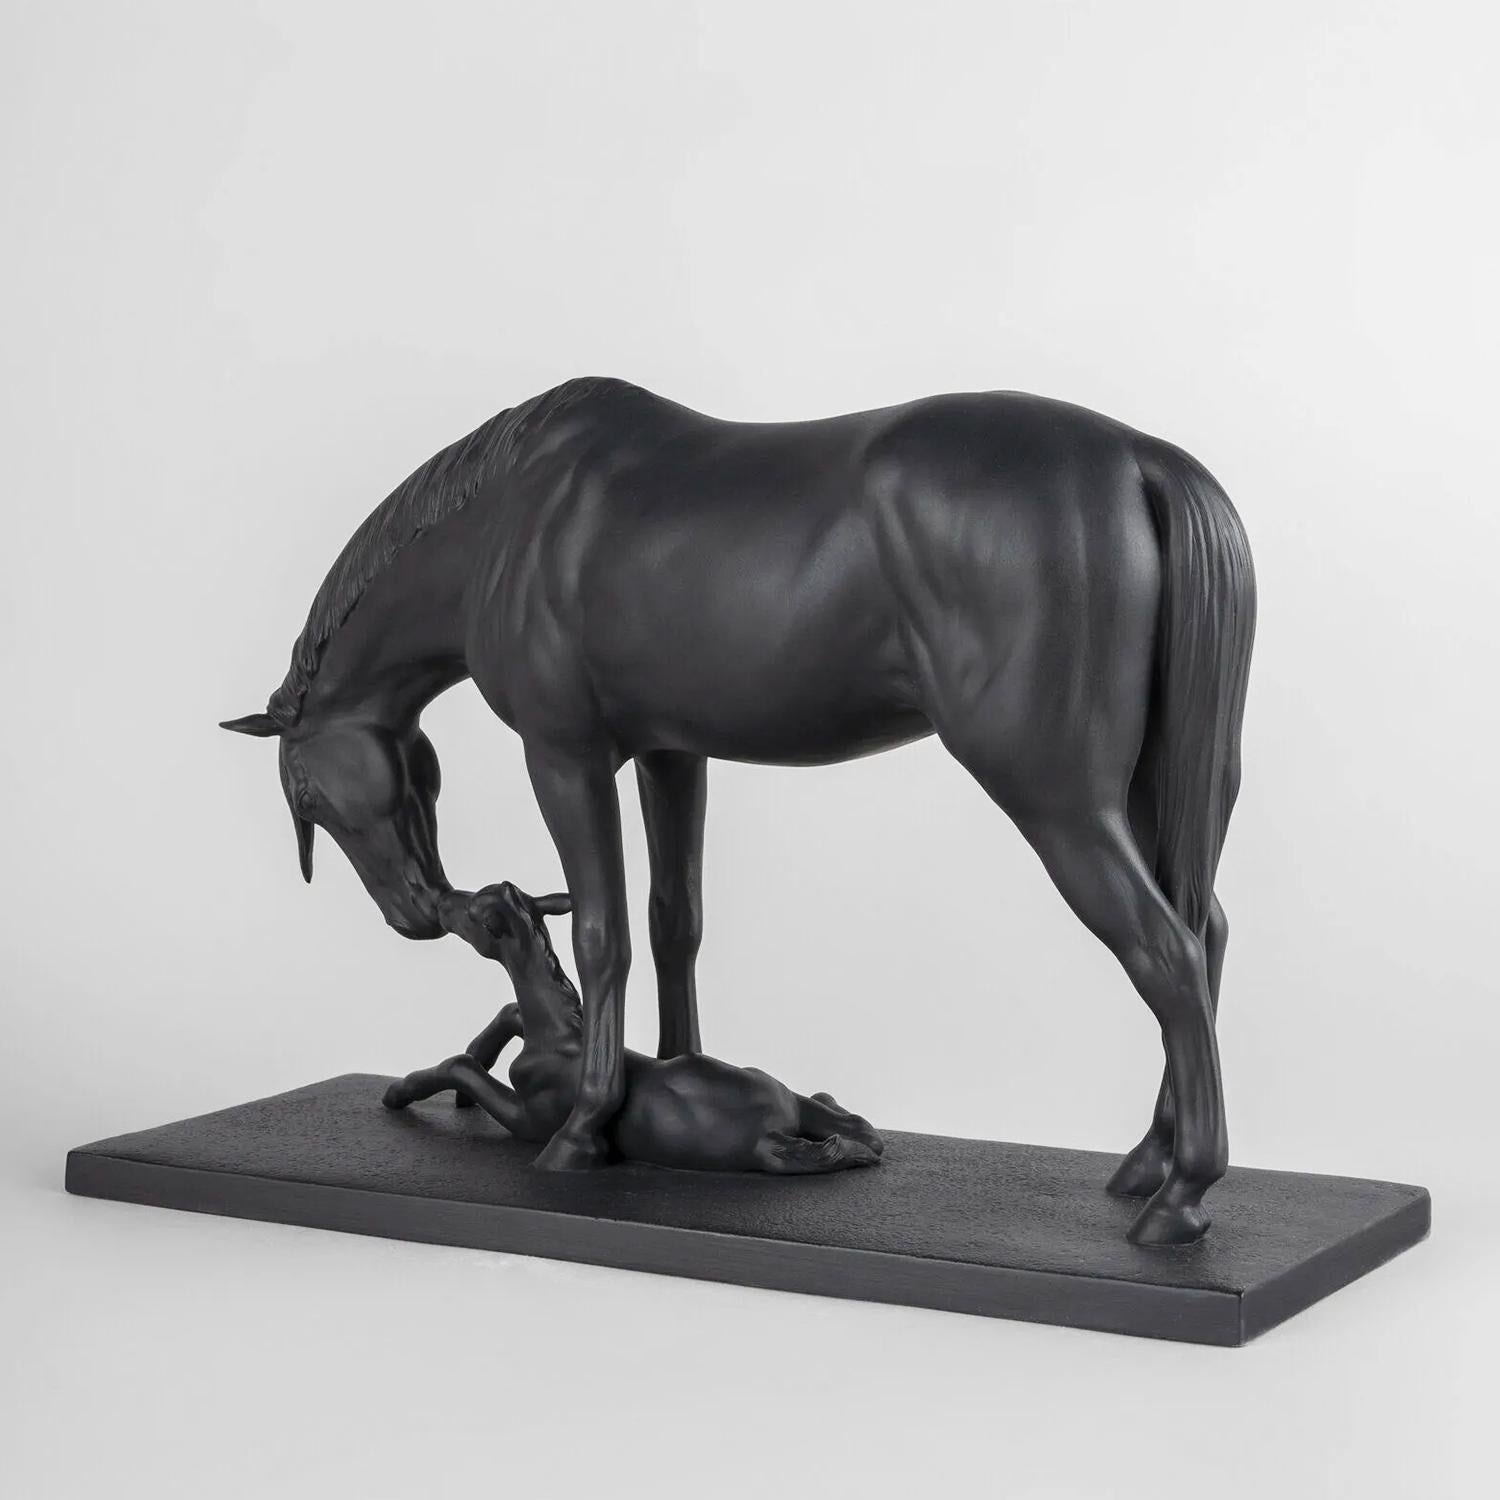 Hand-Crafted Horse Black Sculpture For Sale